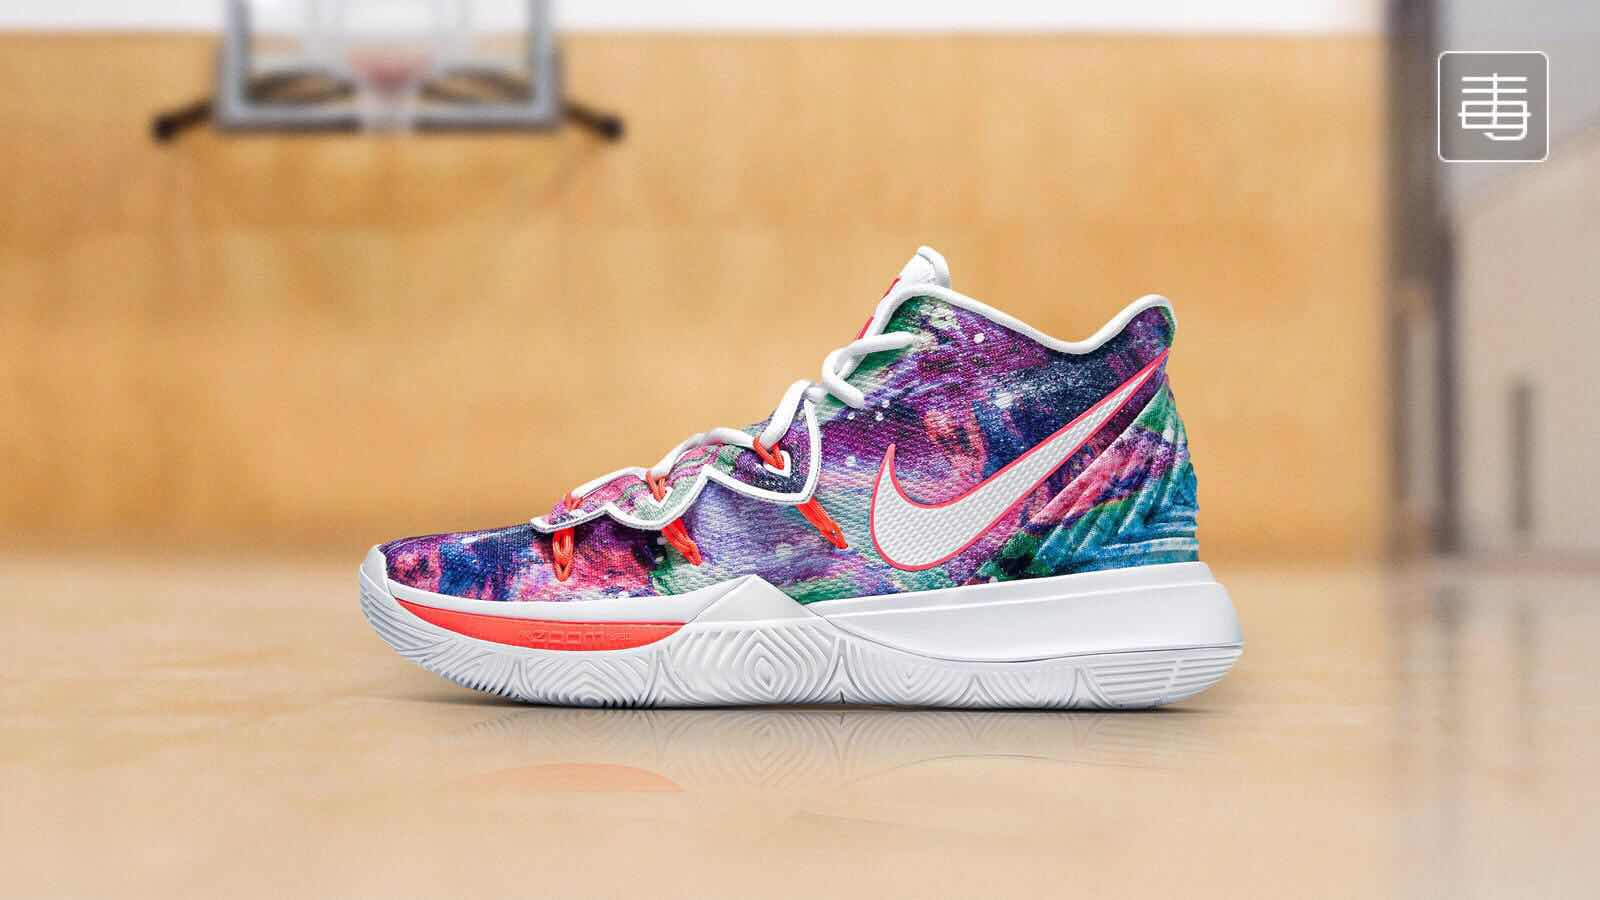 kyrie colorful shoes